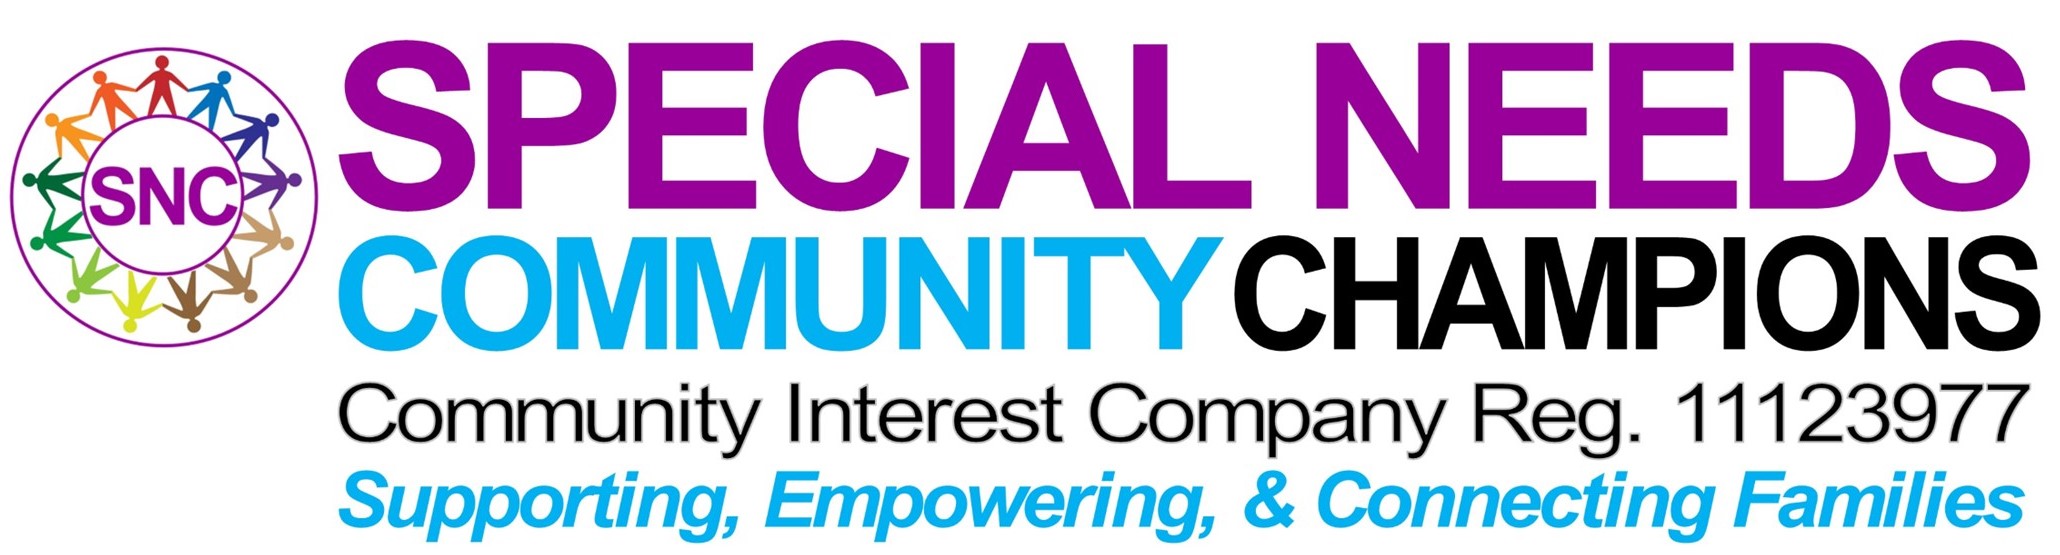 Special Needs Community Champions Network